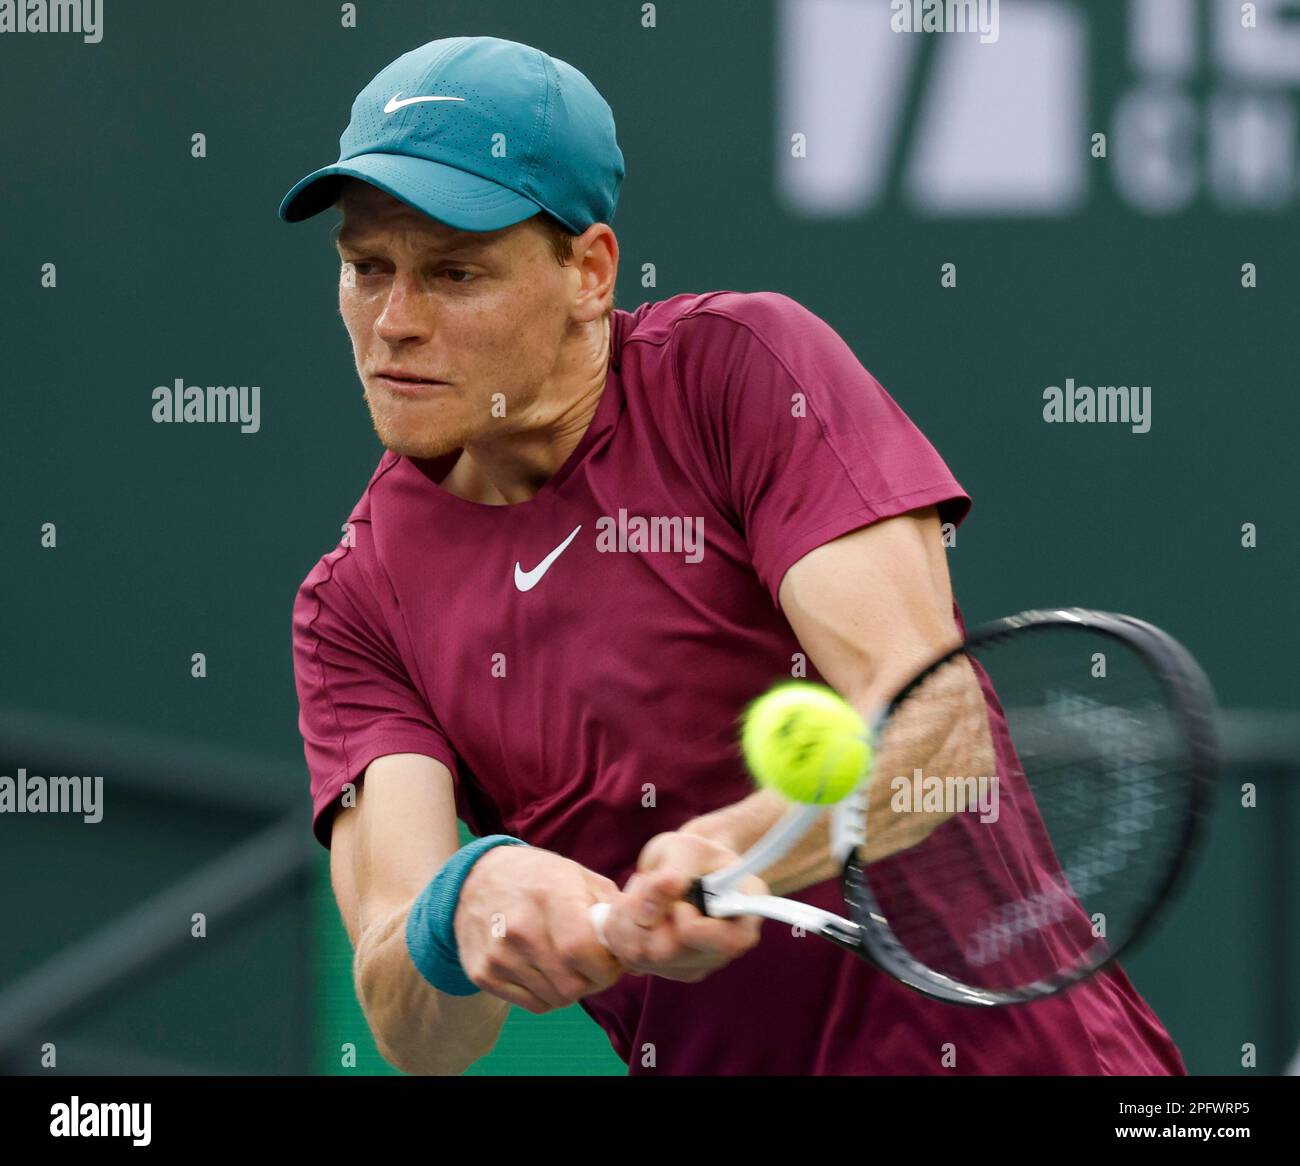 March 18, 2023 Jannik Sinner of Italy returns a shot against Carlos Alcaraz of Spain during a semifinal match at the 2023 BNP Paribas Open at Indian Wells Tennis Garden in Indian